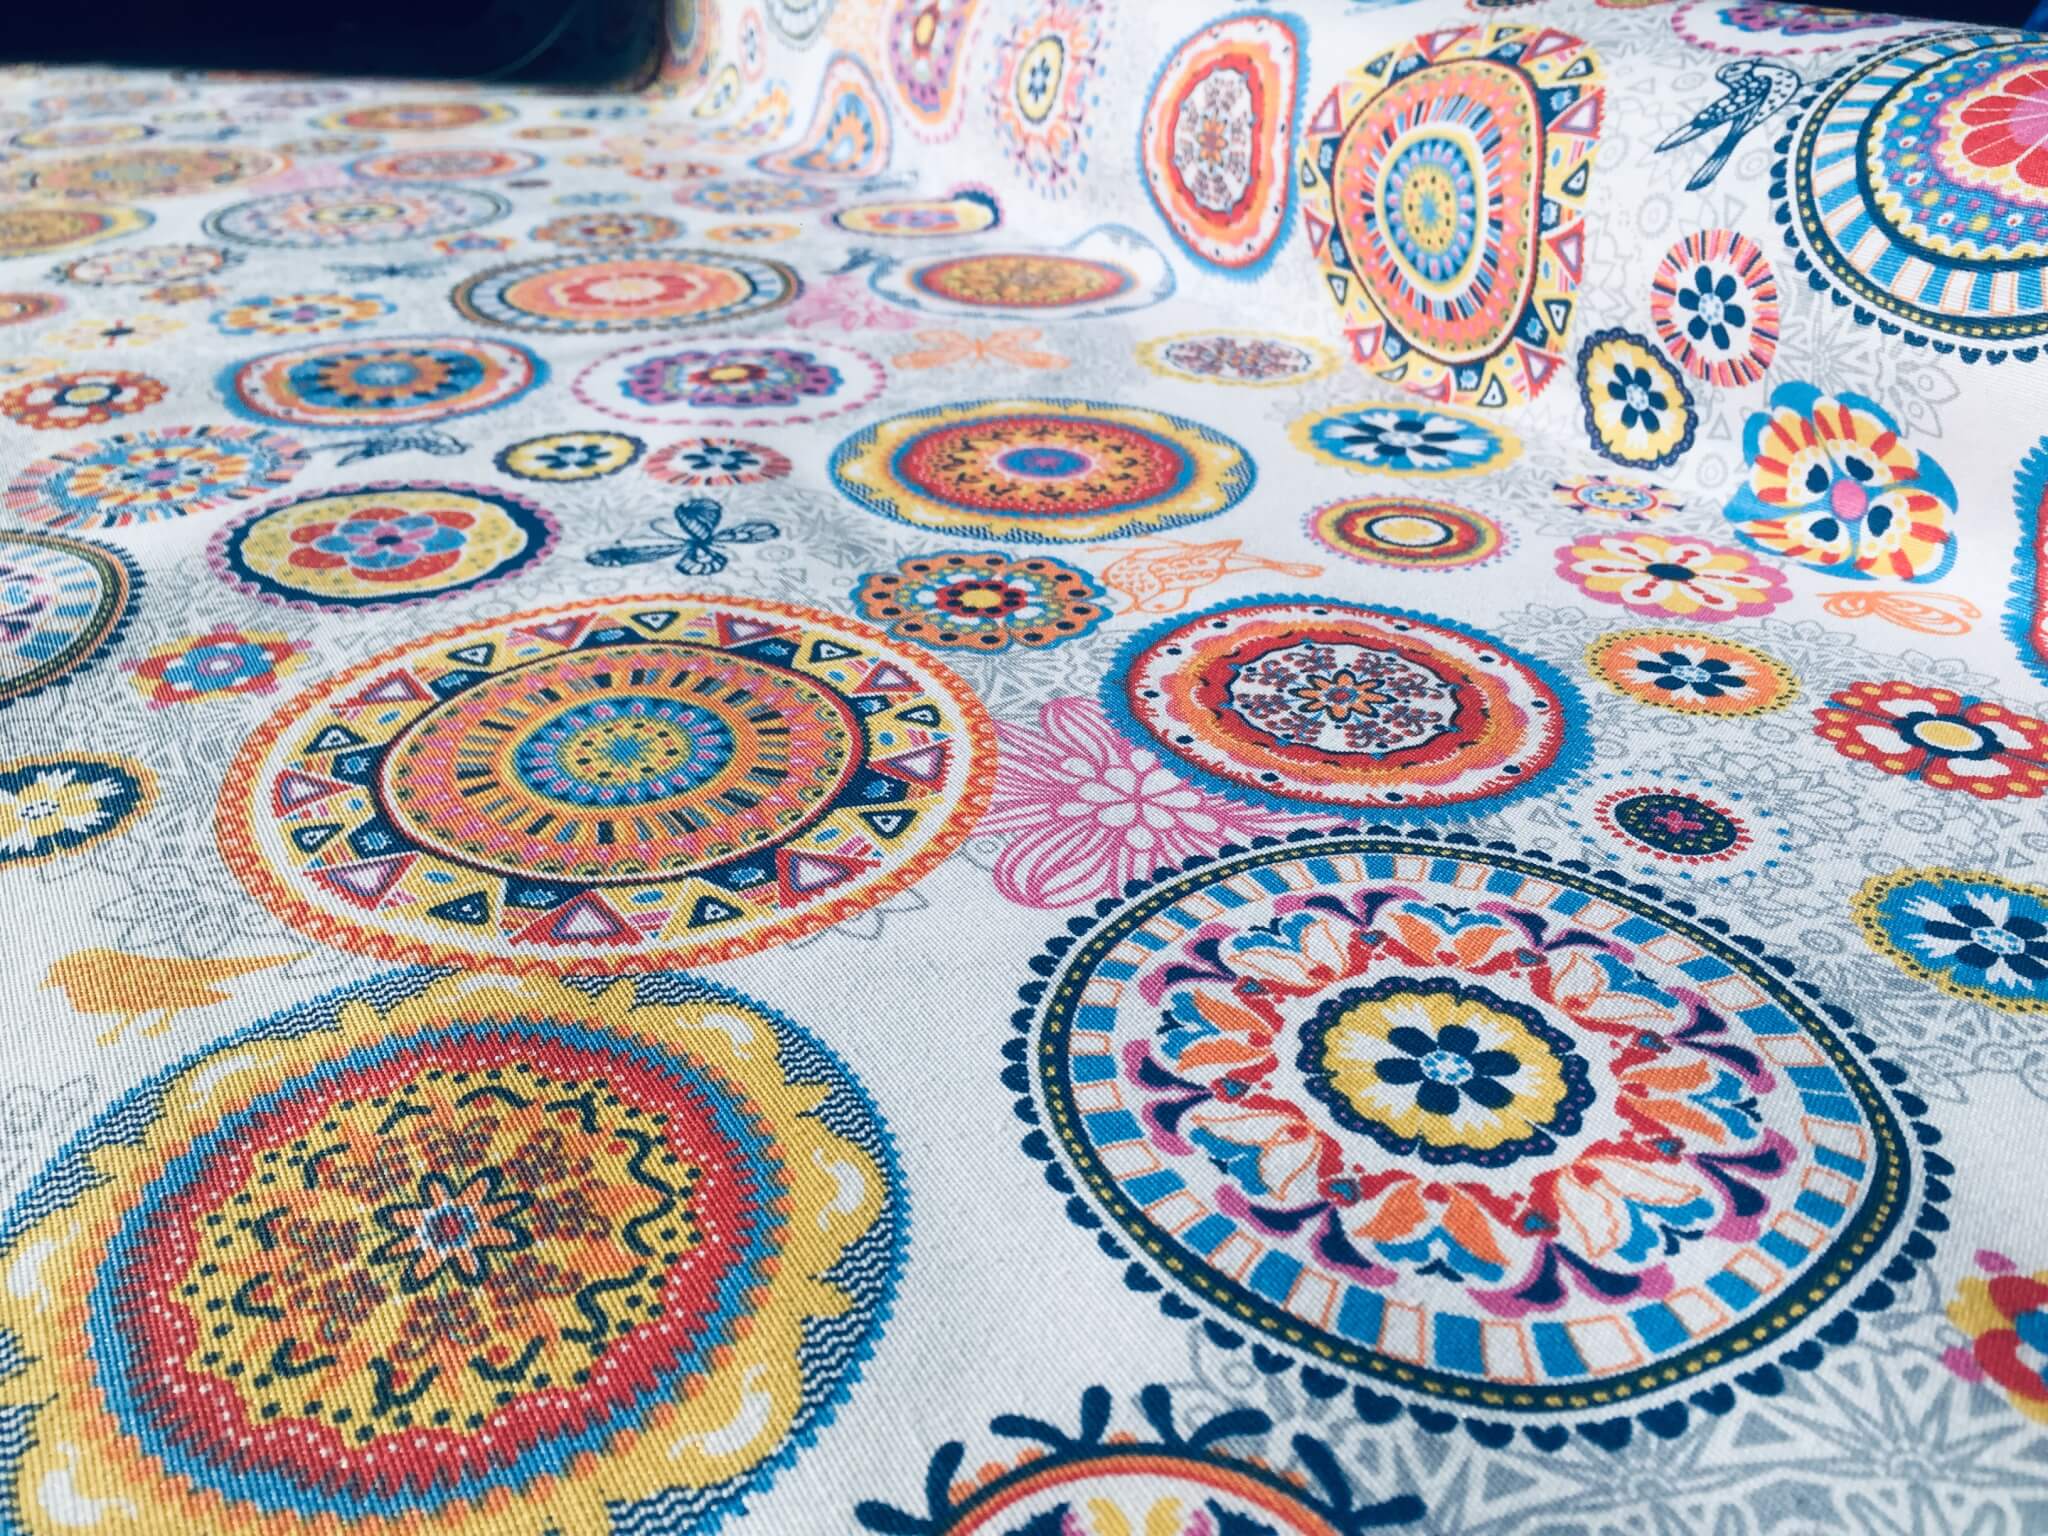 IBIZA SUMMER Flower Mandala Designer Cotton Fabric Material for Dressmaking  Curtain Upholstery - 110 or 280cm extra wide - Lush Fabric